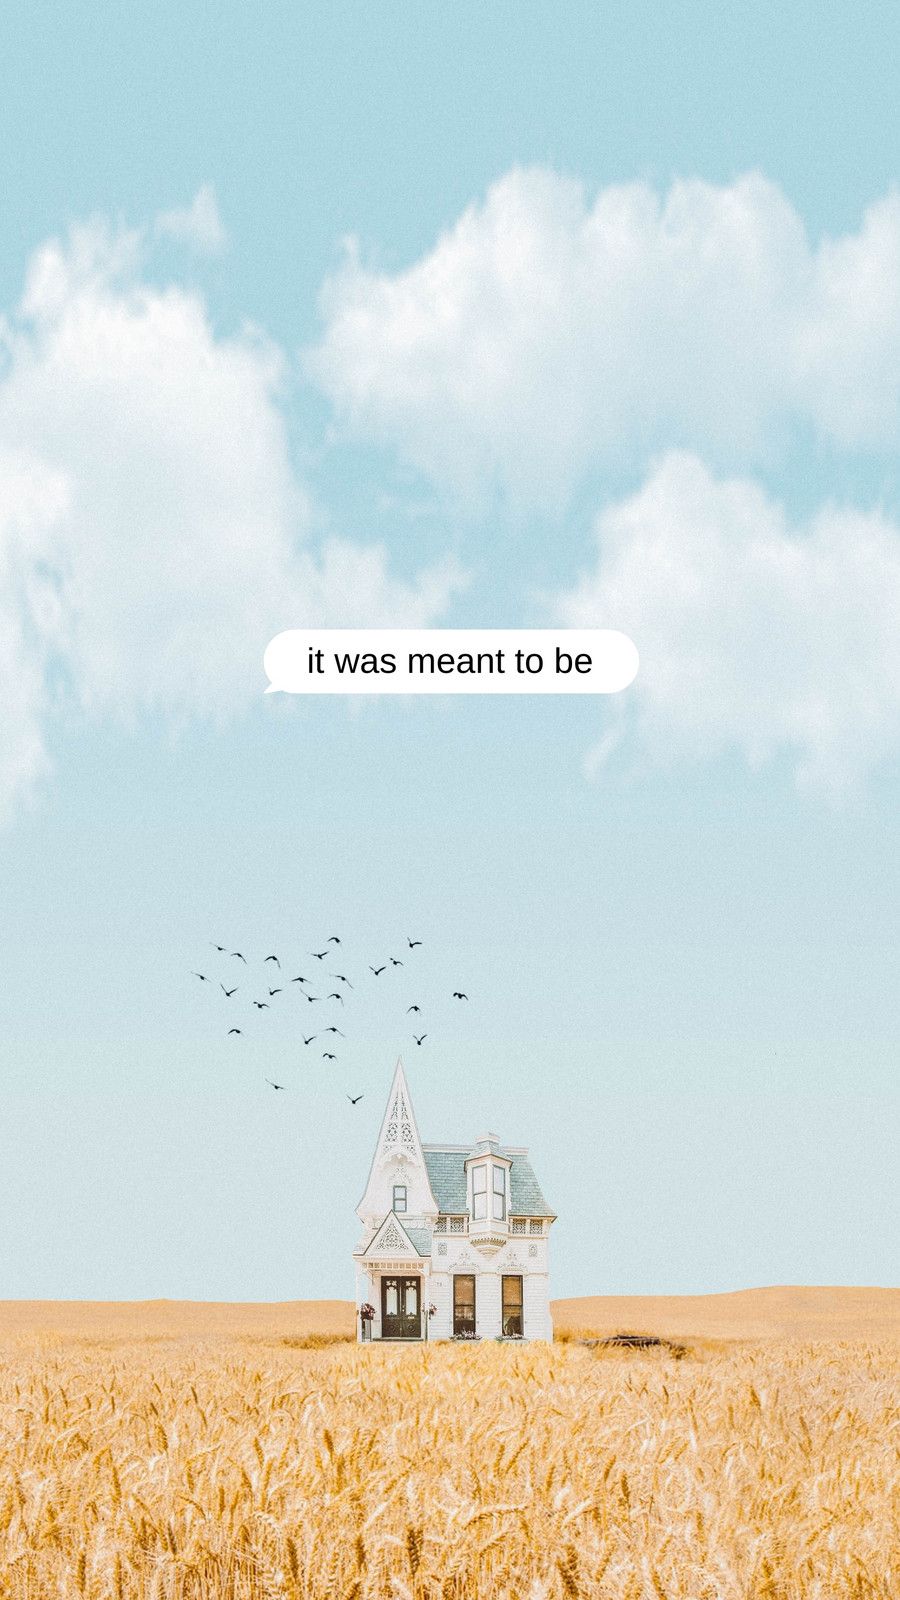 IPhone wallpaper of a house in a field with birds flying in the sky - Farm